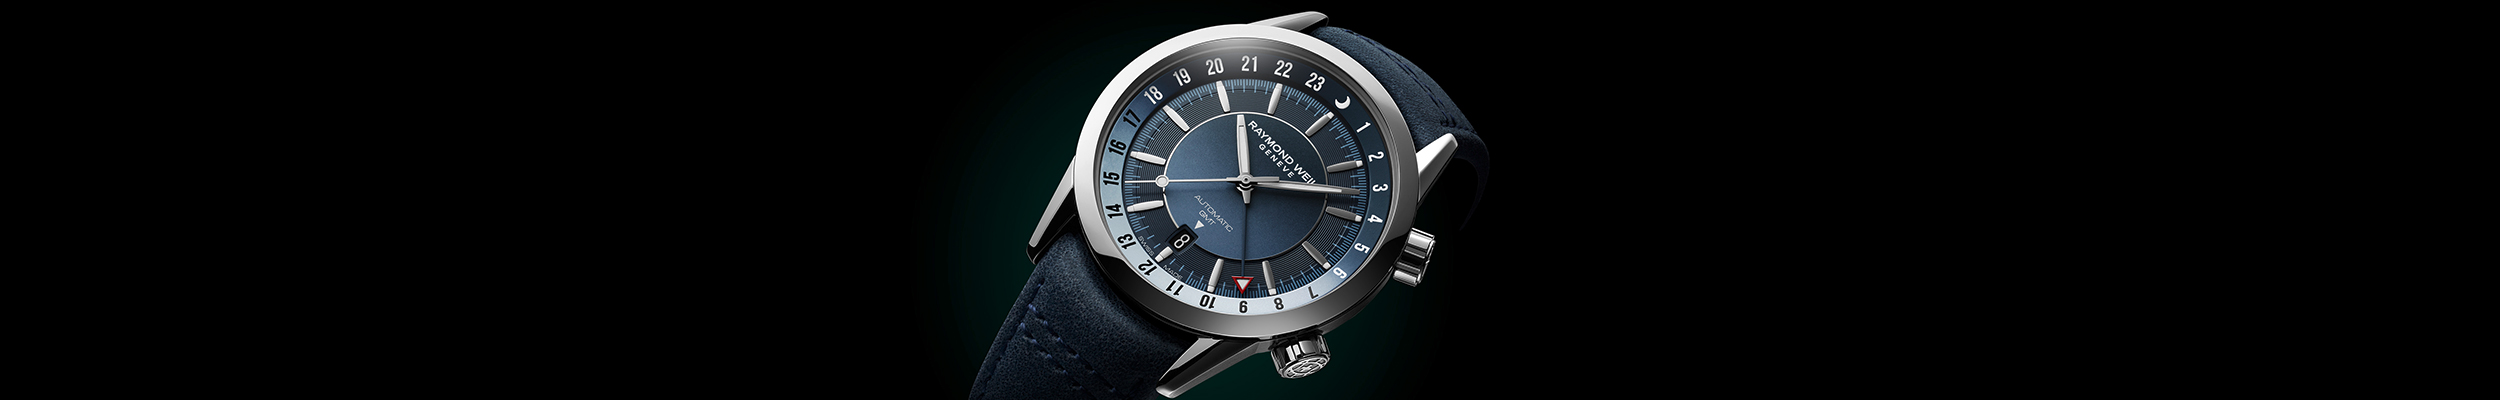 Banner image for GMT Watches page